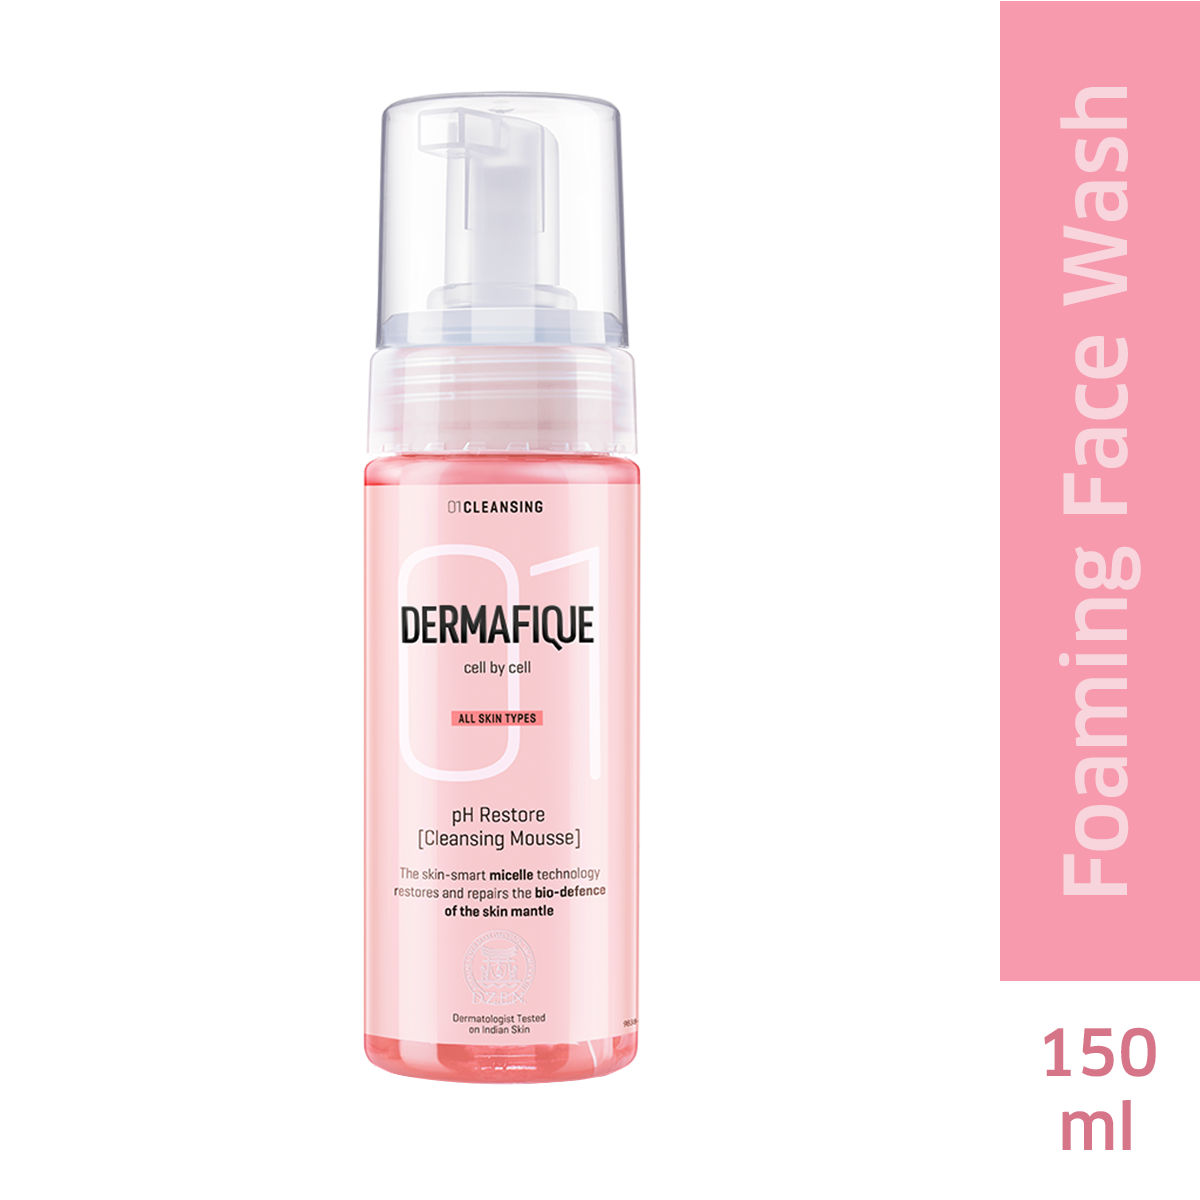 Dermafique Ph Restore Cleansing Mousse, Foaming Face wash, Restores and repairs skin barrier